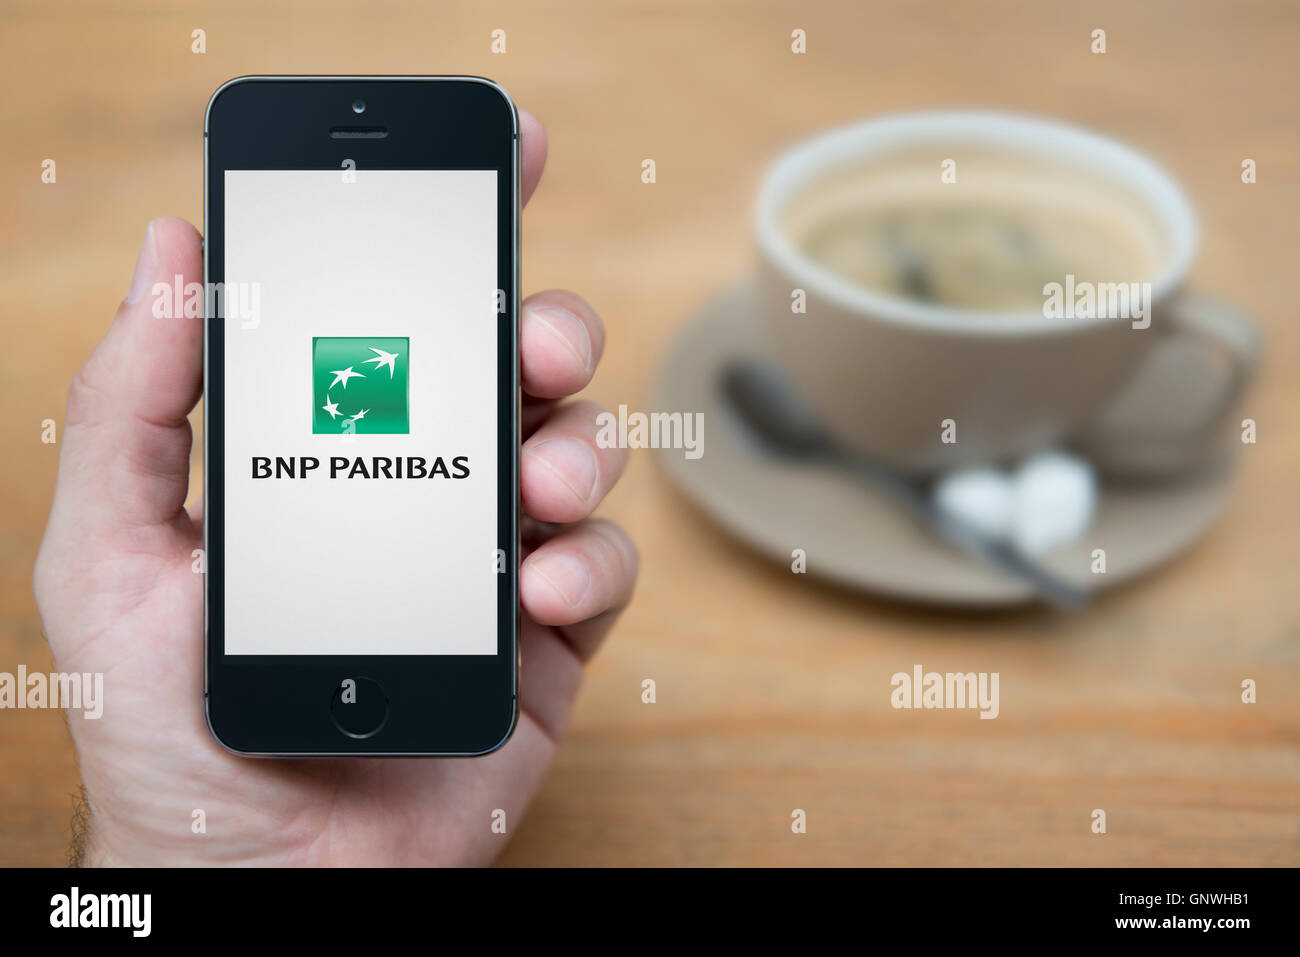 A man looks at his iPhone which displays the BNP Paribas bank logo, while sat with a cup of coffee (Editorial use only). Stock Photo